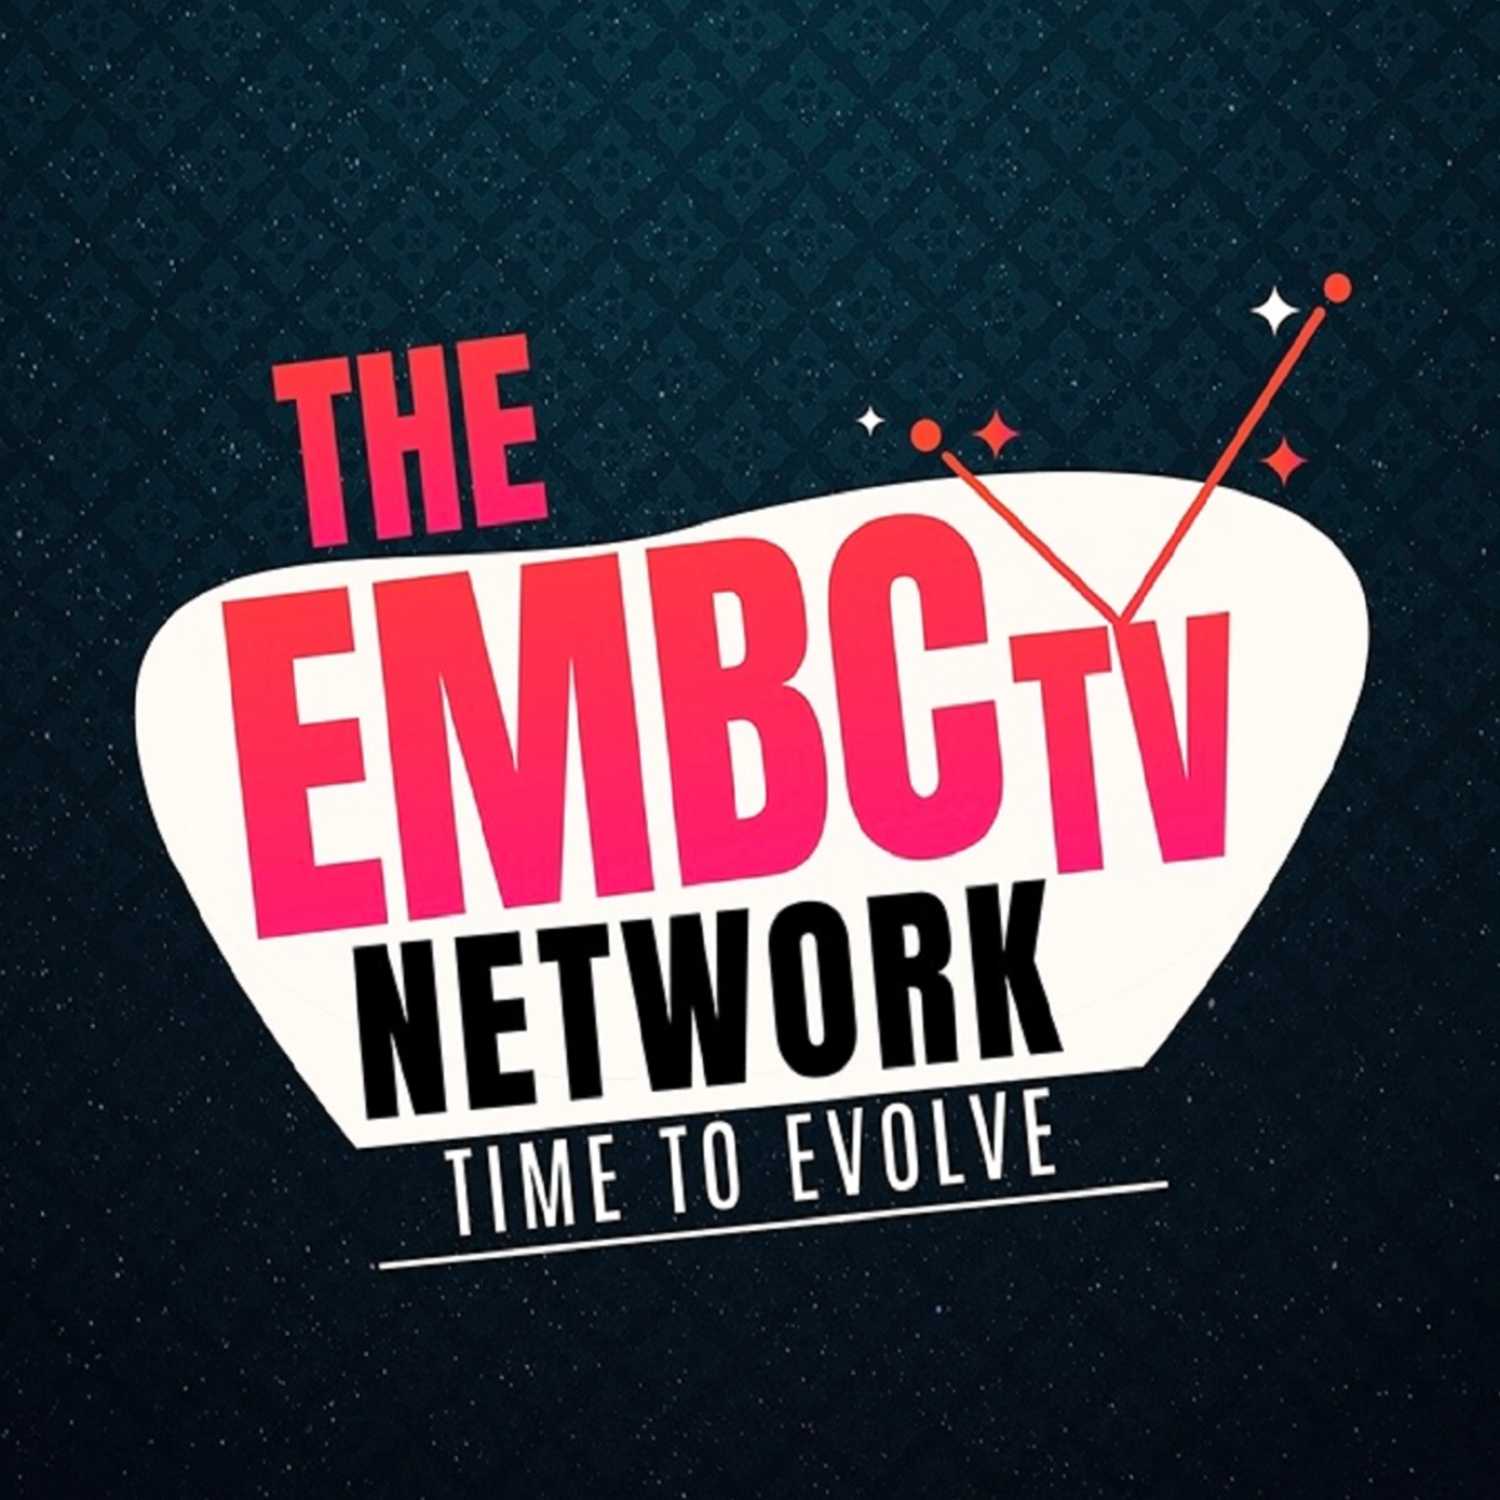 THE EMBC NETWORK